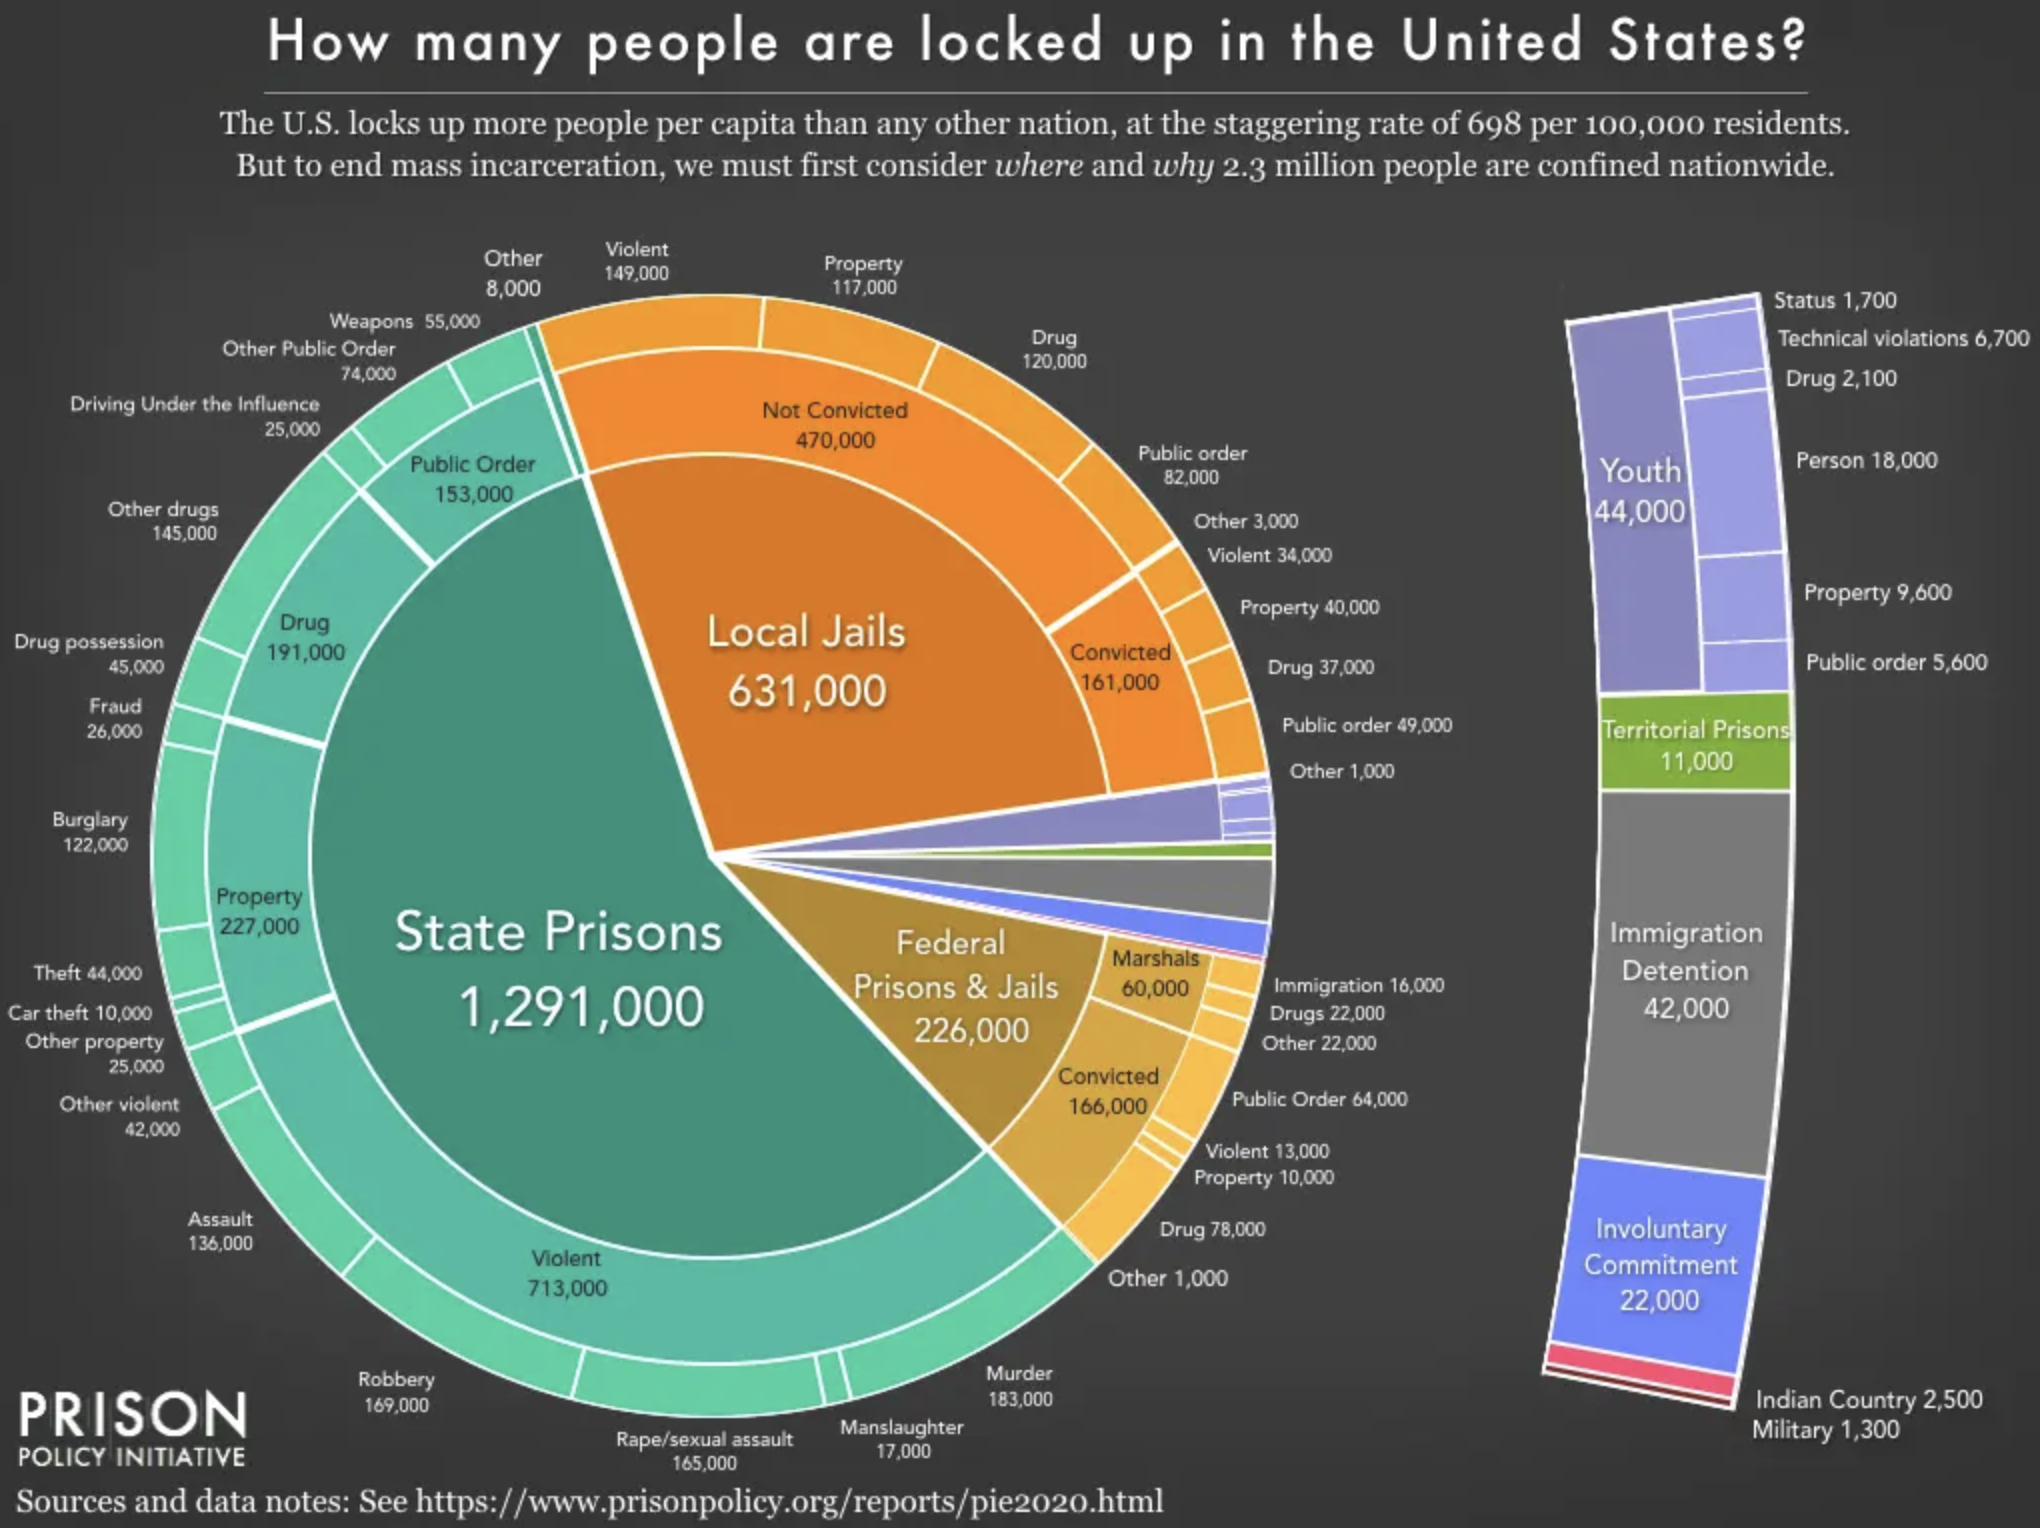 How many people are locked in the United States